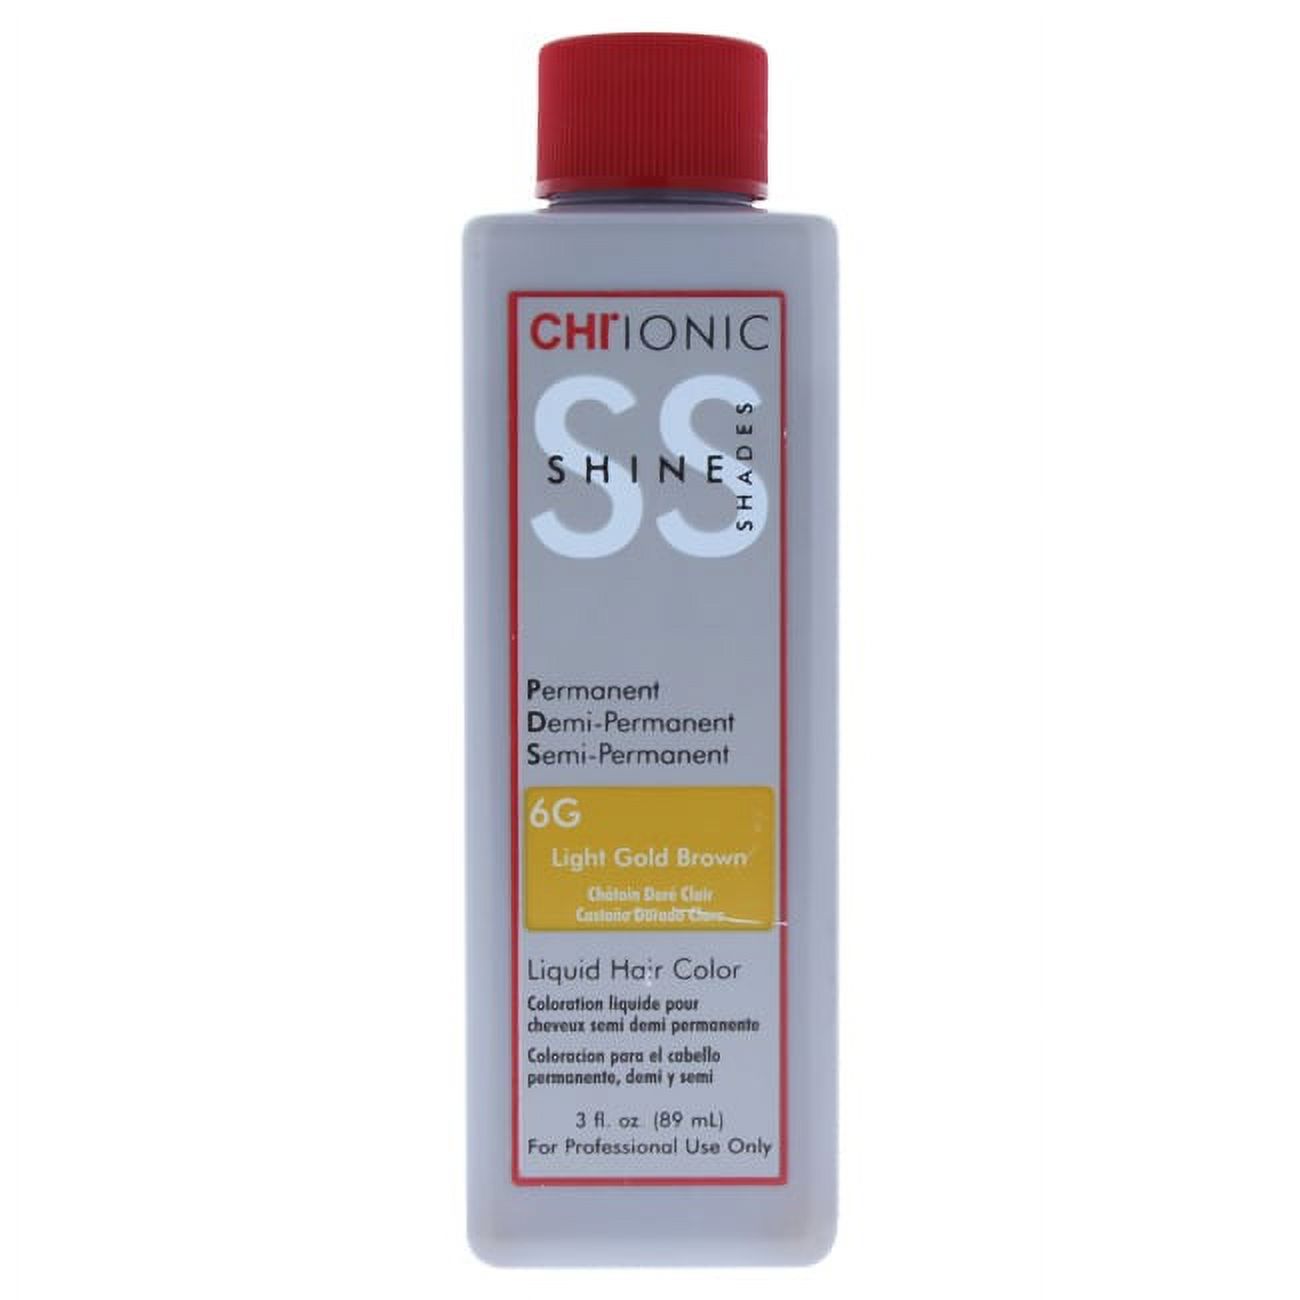 Ionic Shine Shades Liquid Hair Color - 6G Light Gold Brown by CHI for Unisex - 3 oz Hair Color - image 2 of 2